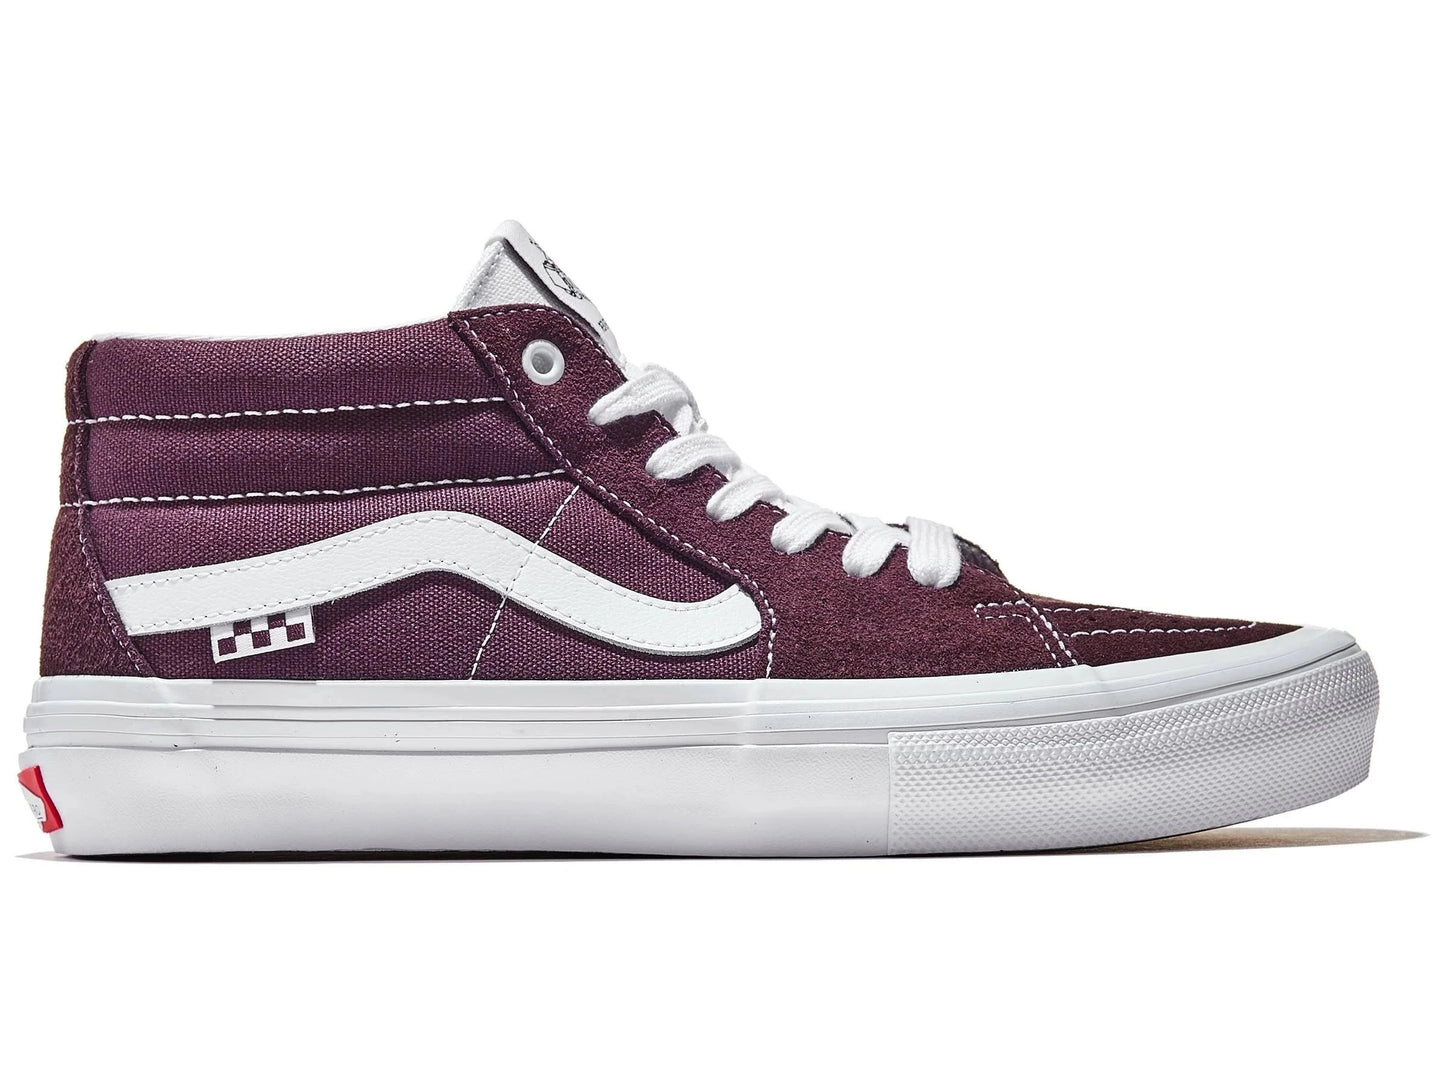 VANS SKATE GROSSO WRAPPED WINE